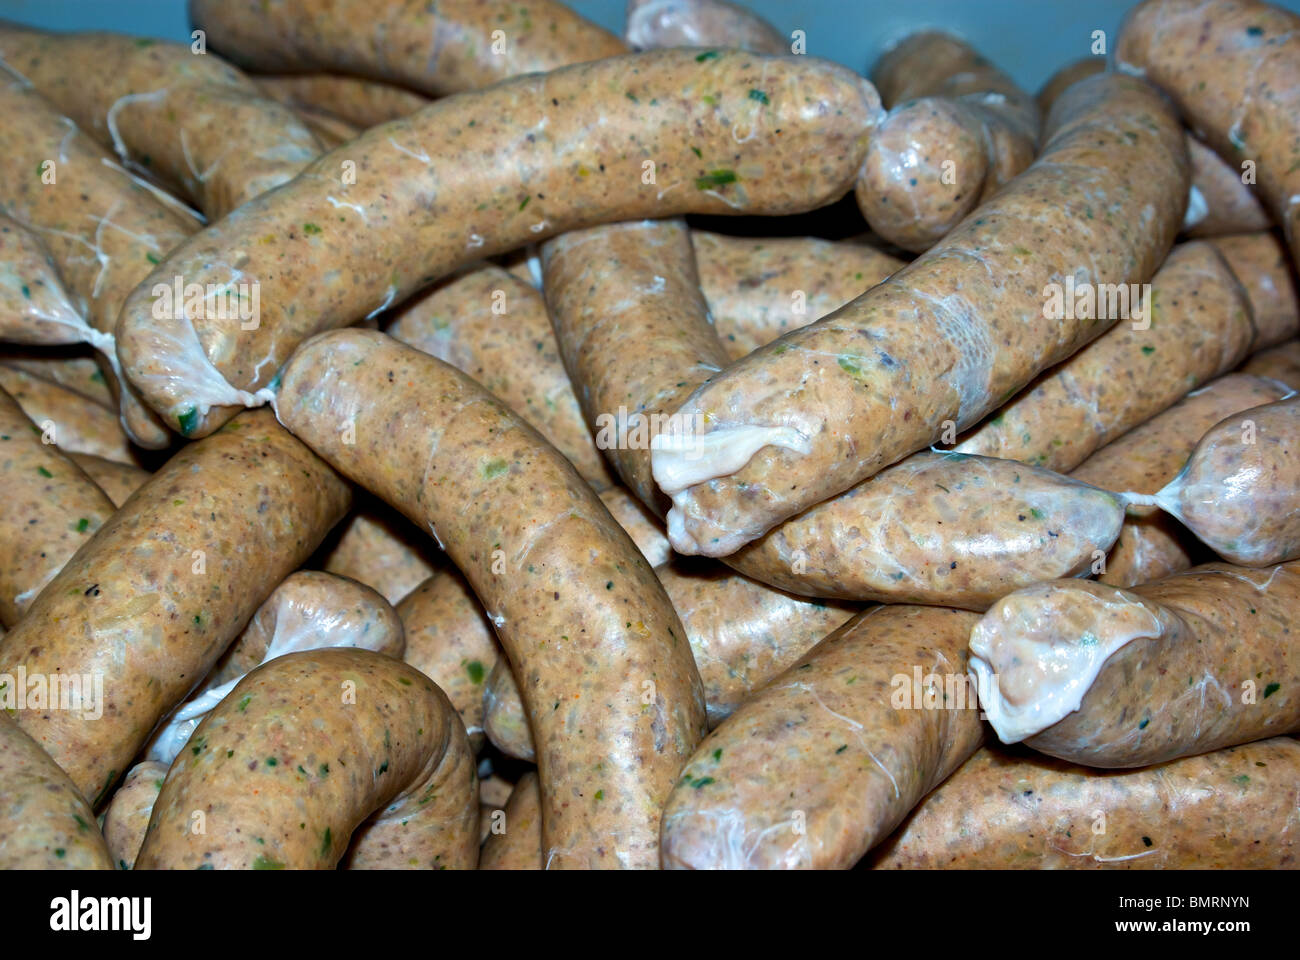 Plastic tub of spicy boudin blanc sausage made with pork green onions spices rice hot peppers liver Stock Photo